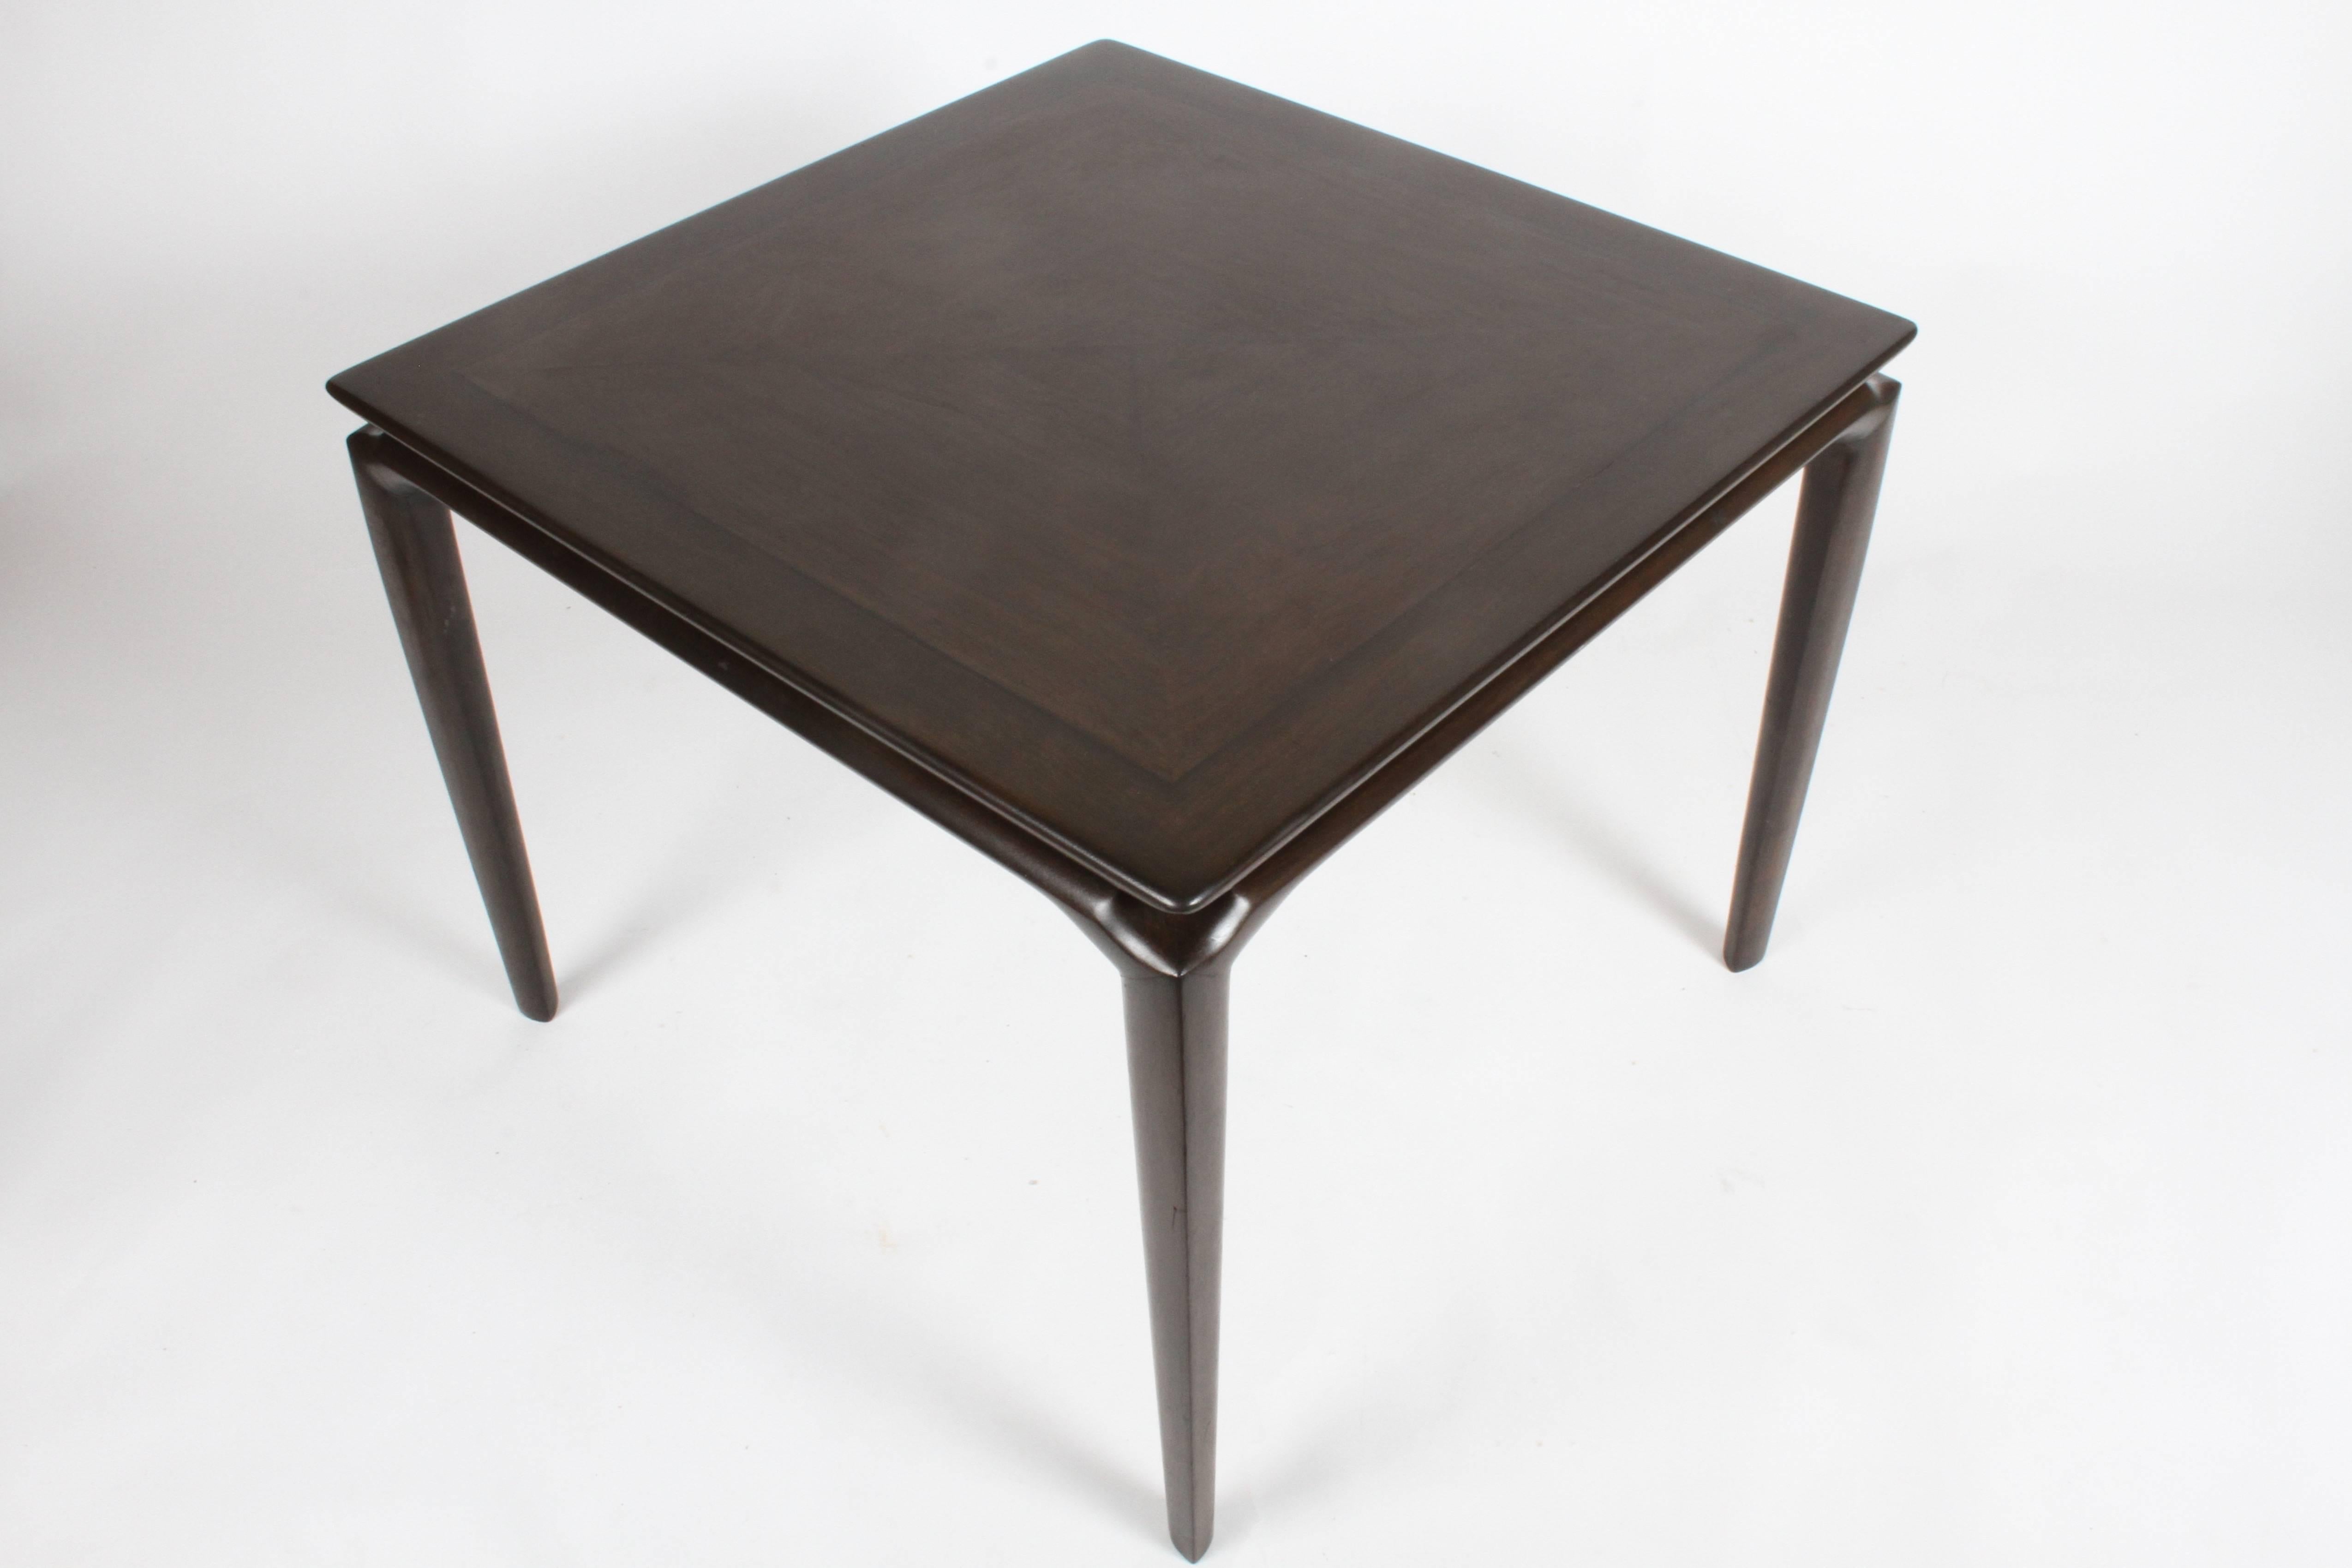 Midcentury sculptural Maurice Bailey for Monteverdi, Young of California card, game table or kitchen table. Beautiful sculpted legs, gives a floating effect to the top. Top has edge border and inlaid veneer, Very nice original finish, minor scuffs /